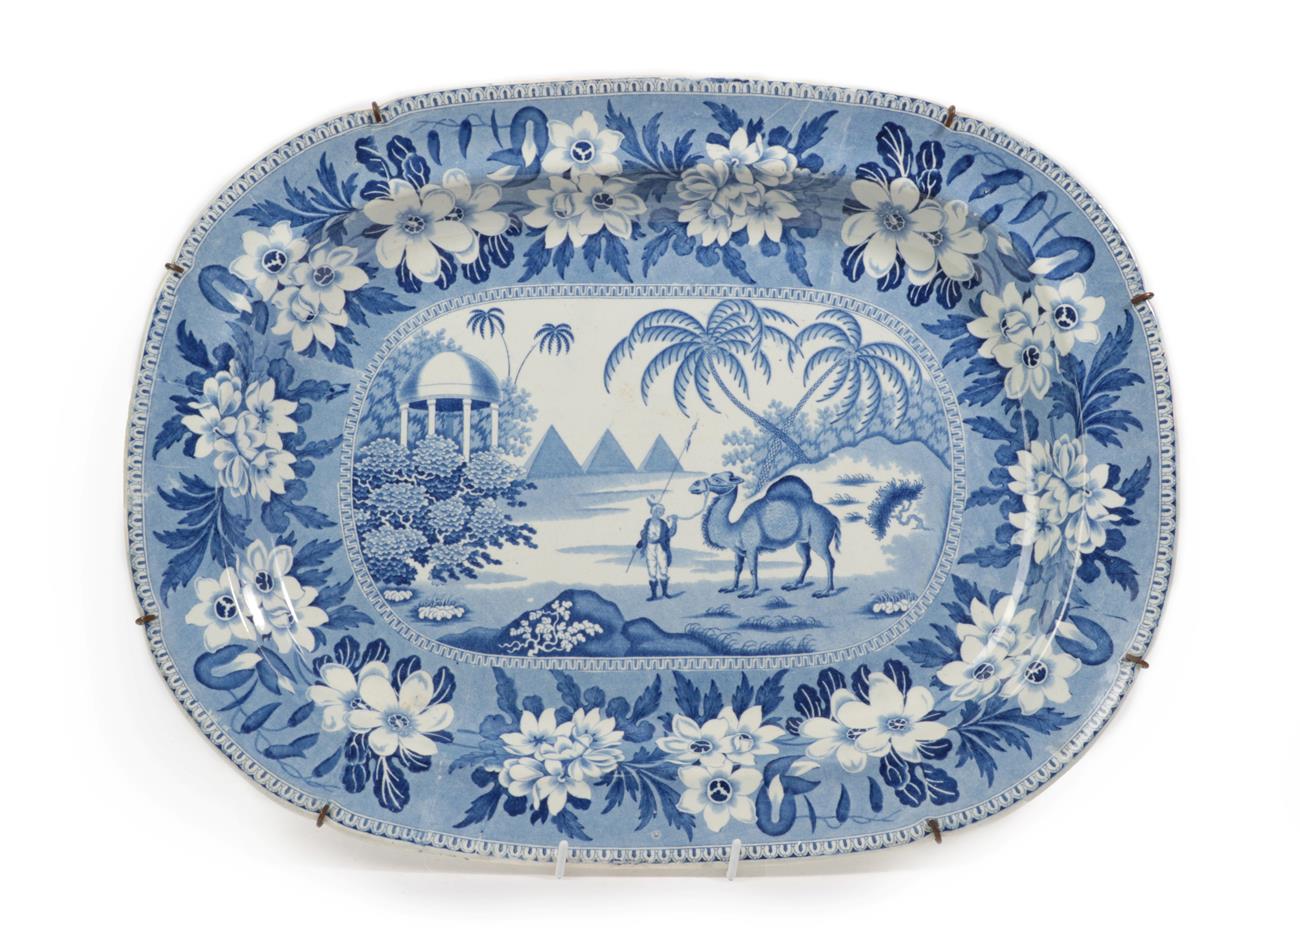 Lot 42 - A Pearlware Meat Platter, circa 1830, printed in underglaze blue with a camel and rider,...